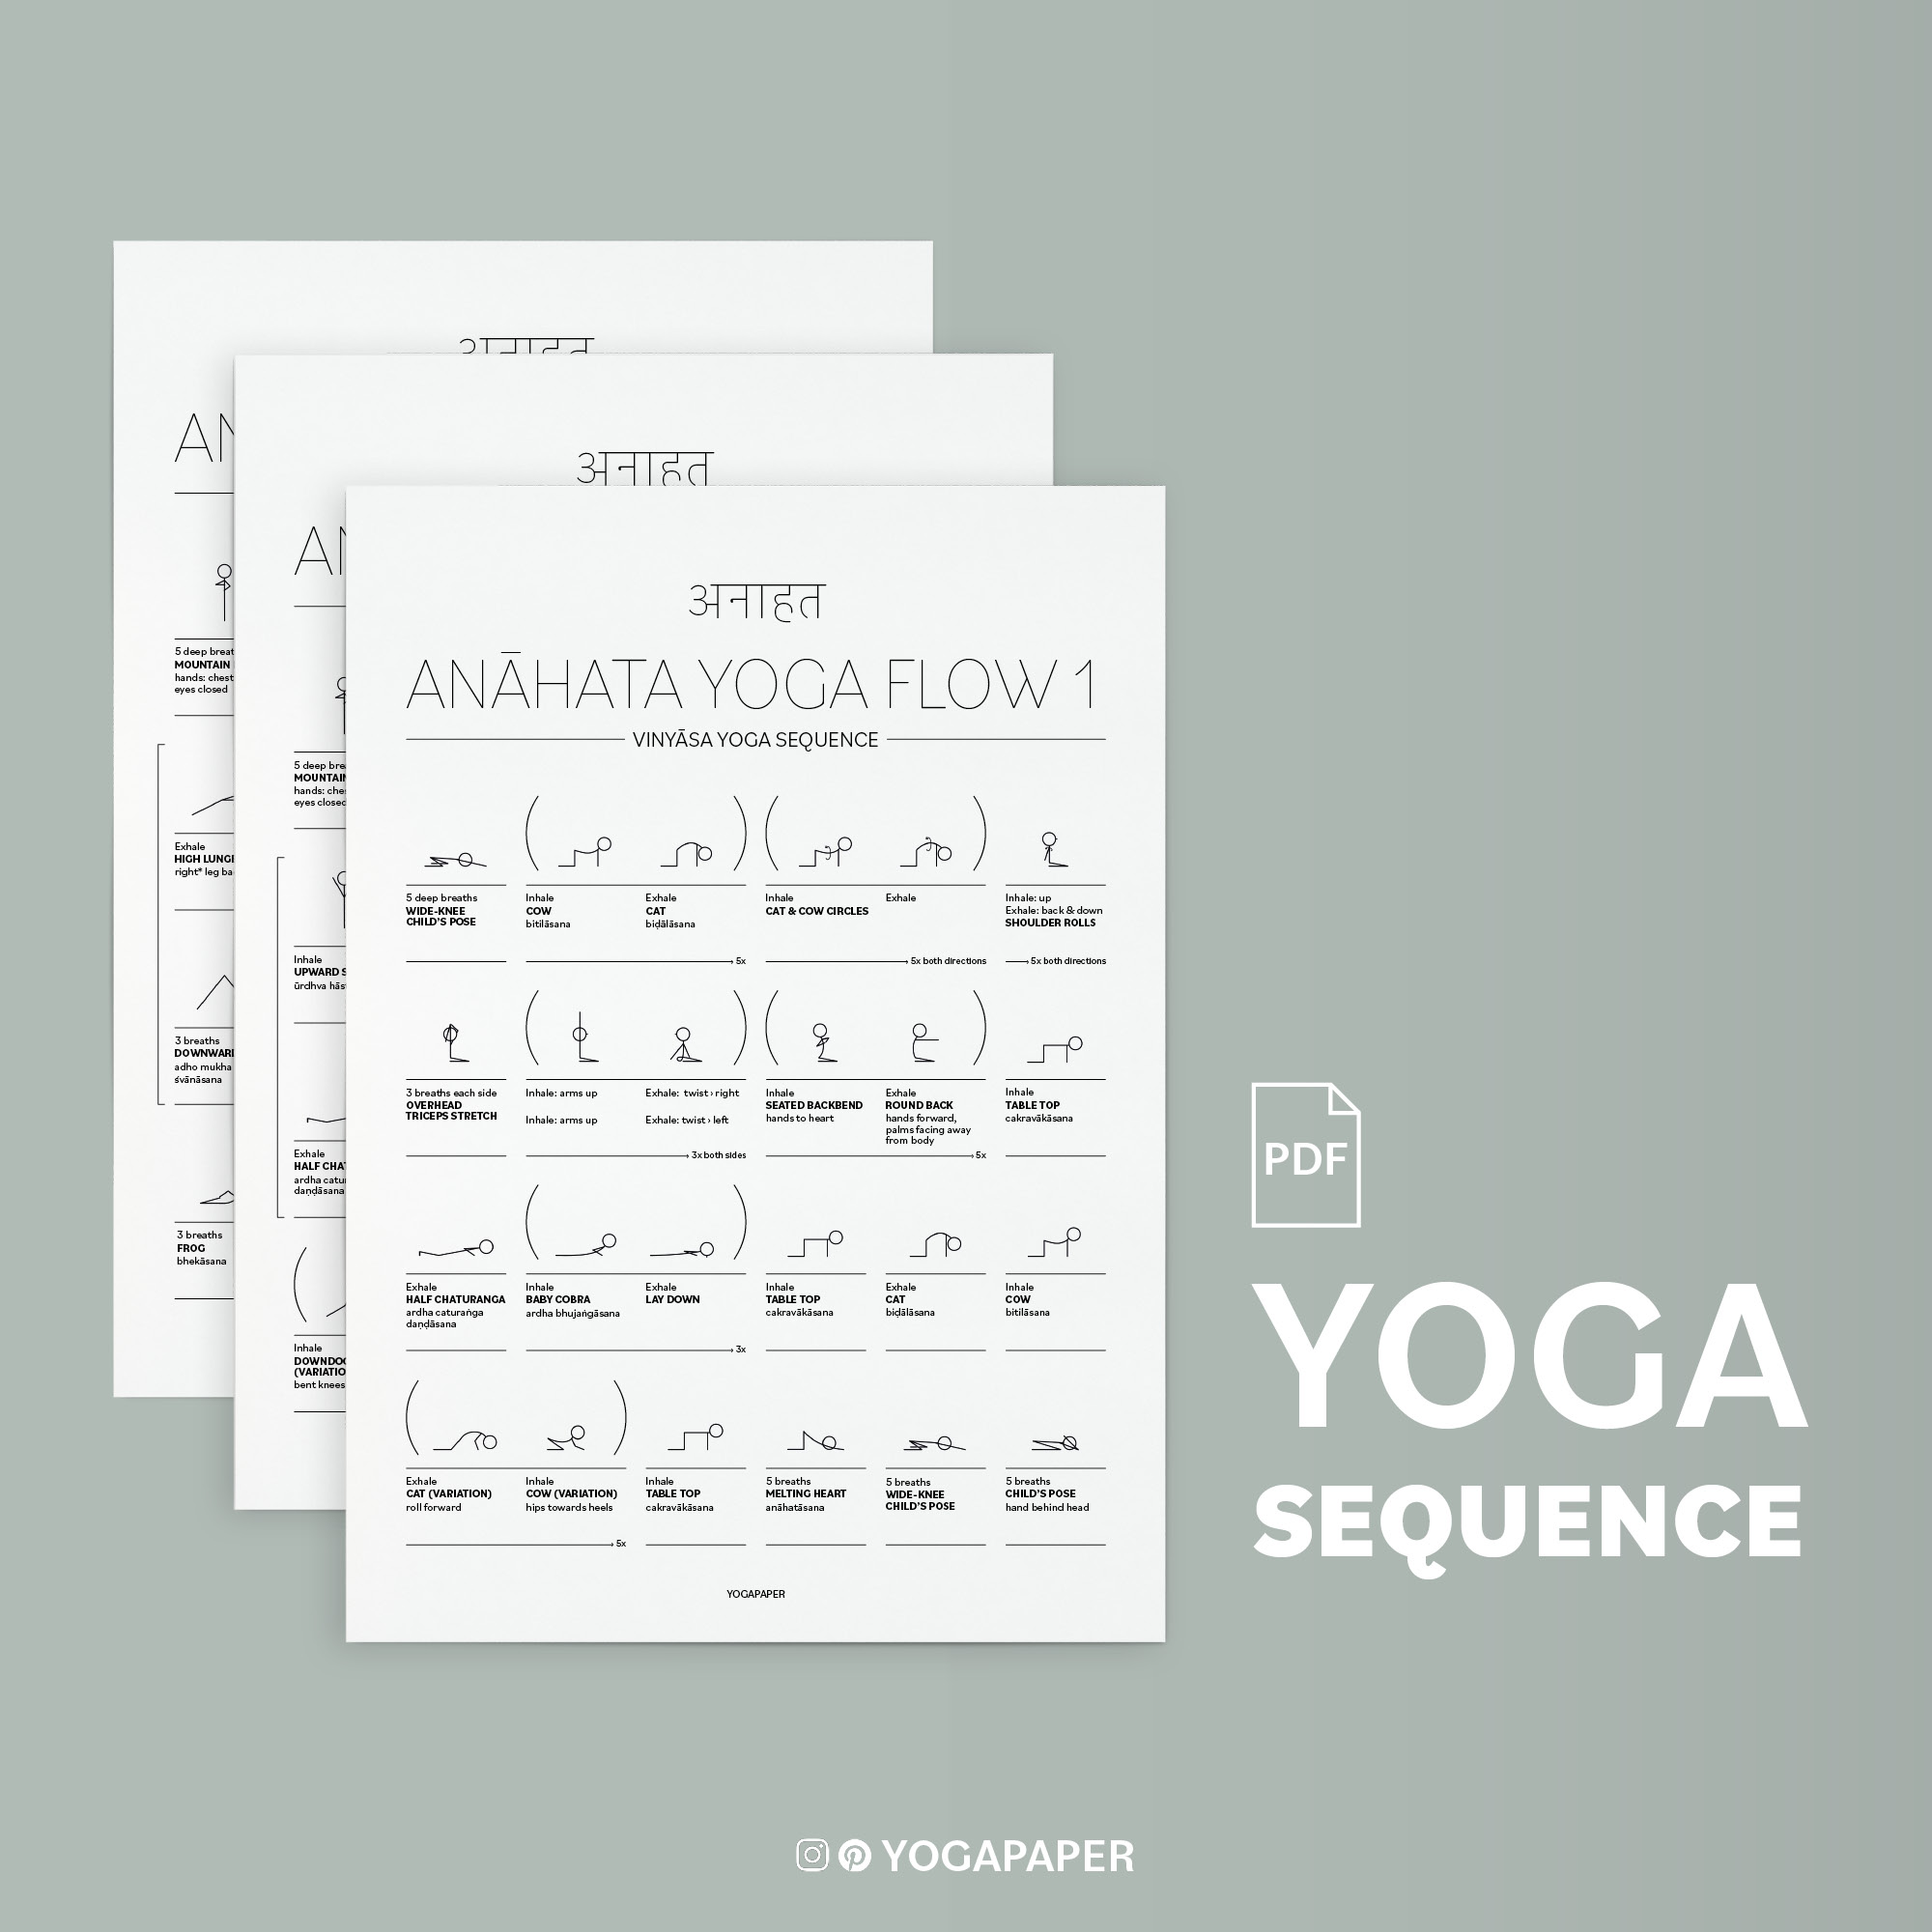 Is this a good yoga sequence? : r/yoga